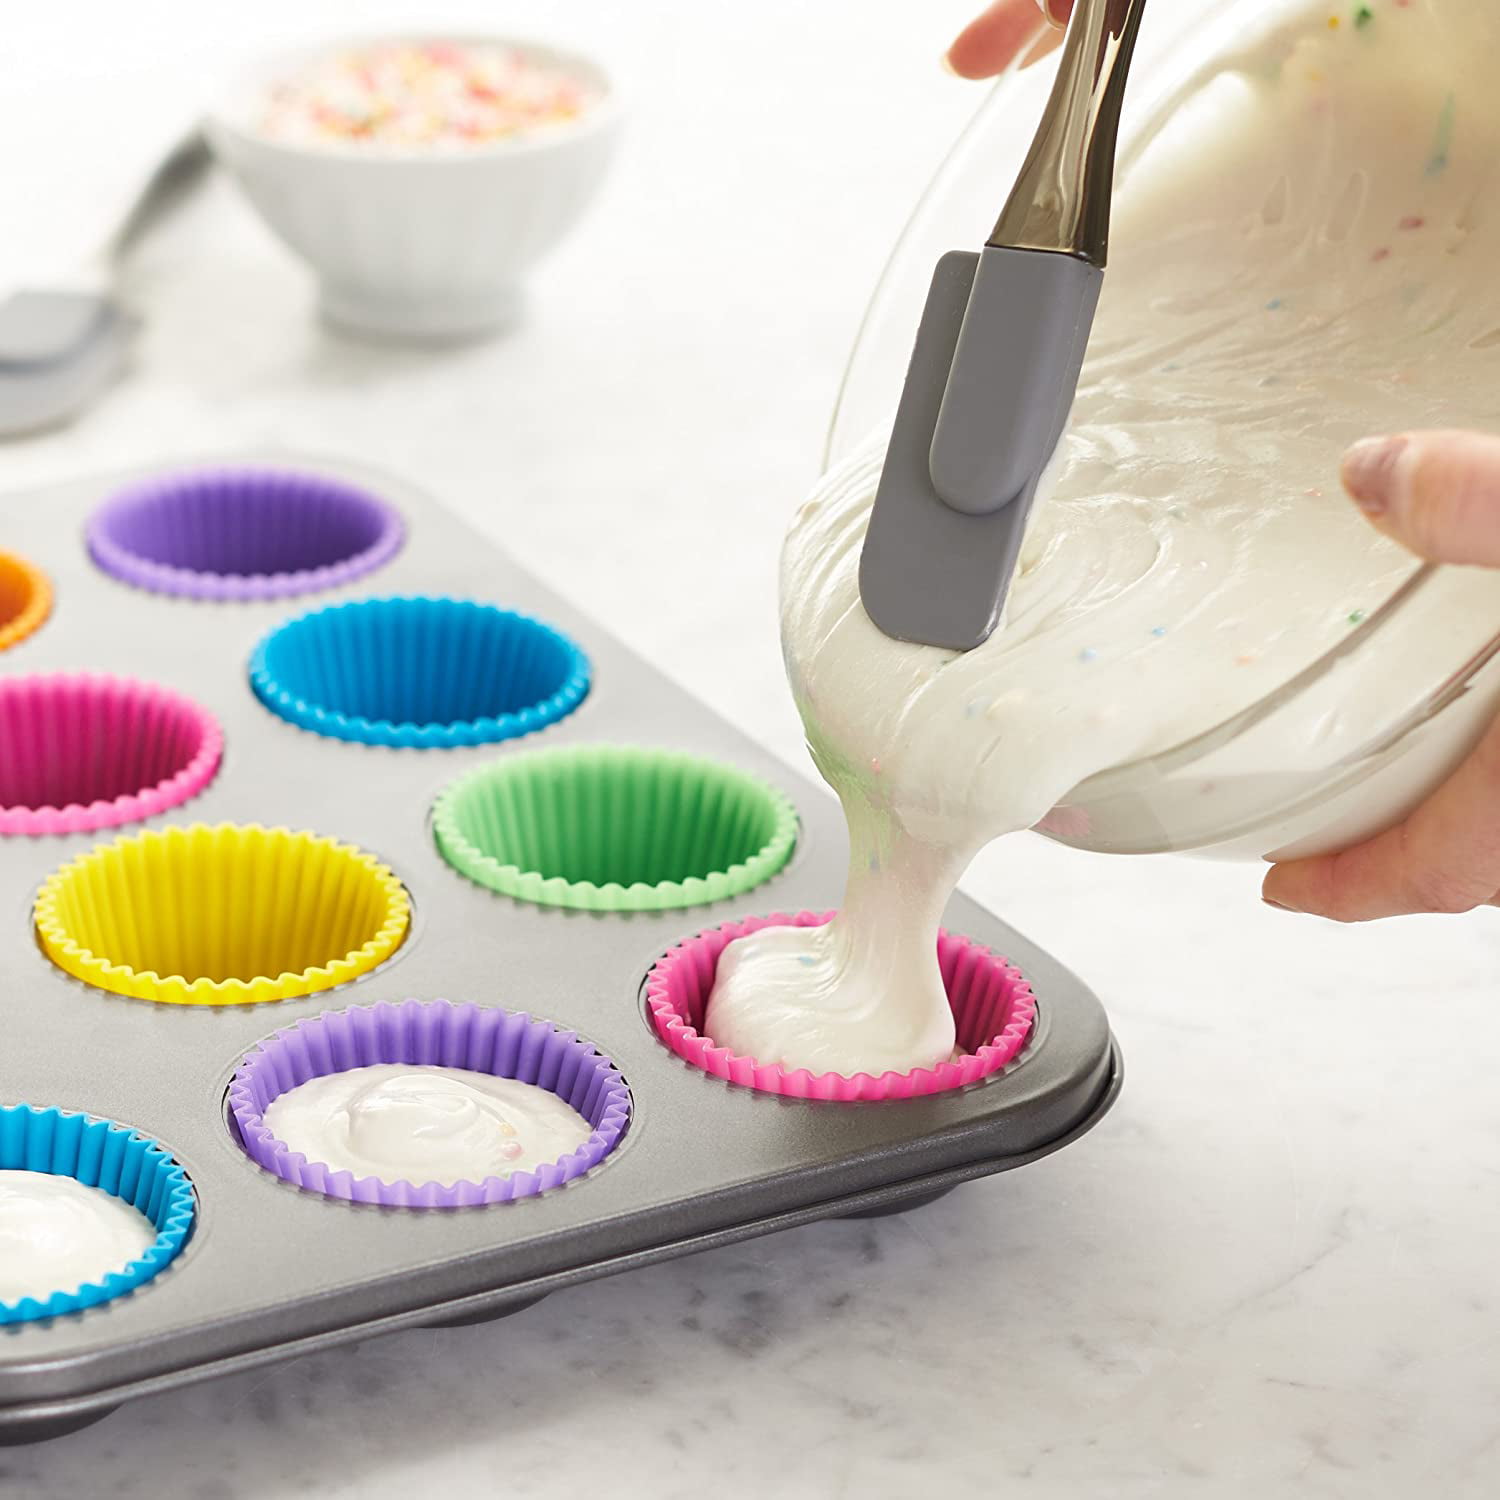 🔥BakeBaking Mini Muffin Pan - Reusable Silicone Cupcake Molds 2in 24 Pack  - Small Baking Cups Tr … - Bakeware, Facebook Marketplace